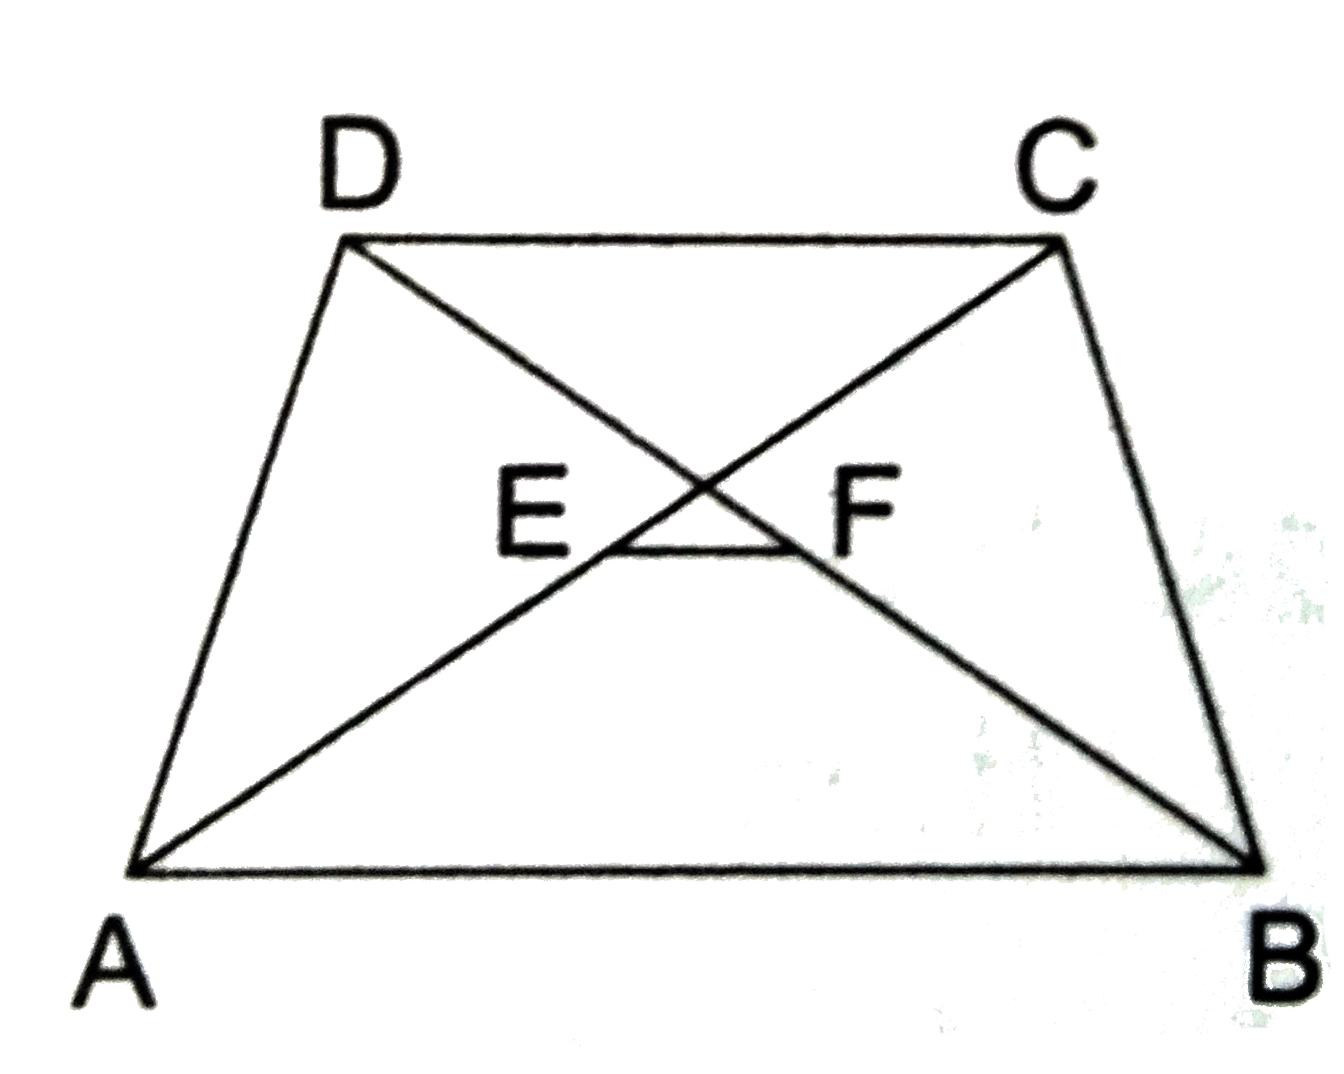 In a trapezium ABCD, E and F be the midpoints of the diagonals AC and BD respectively. Then, EF = ?